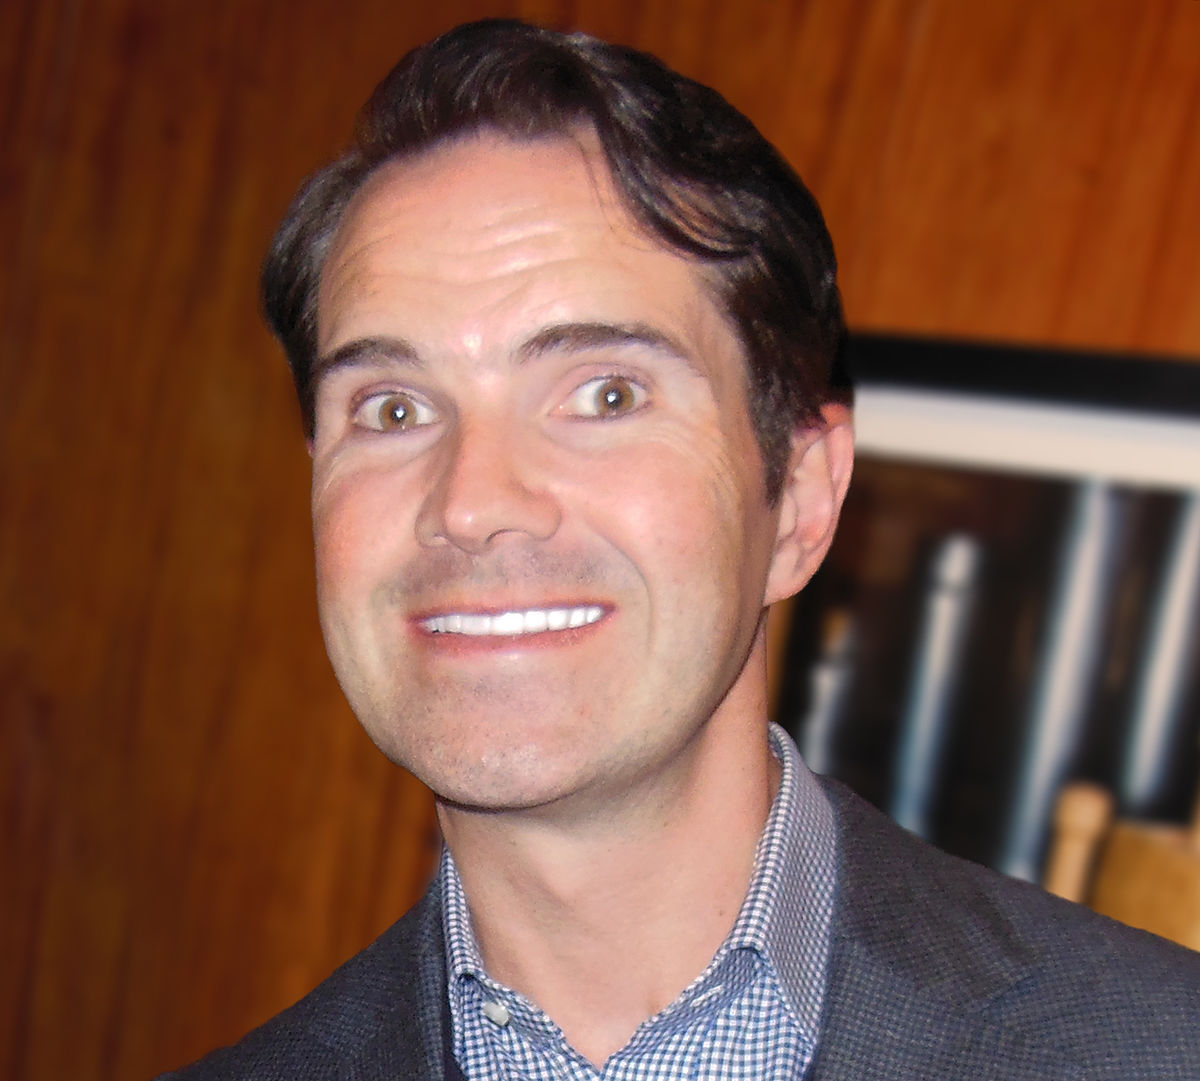 Photo of Jimmy Carr by Albin Olsson